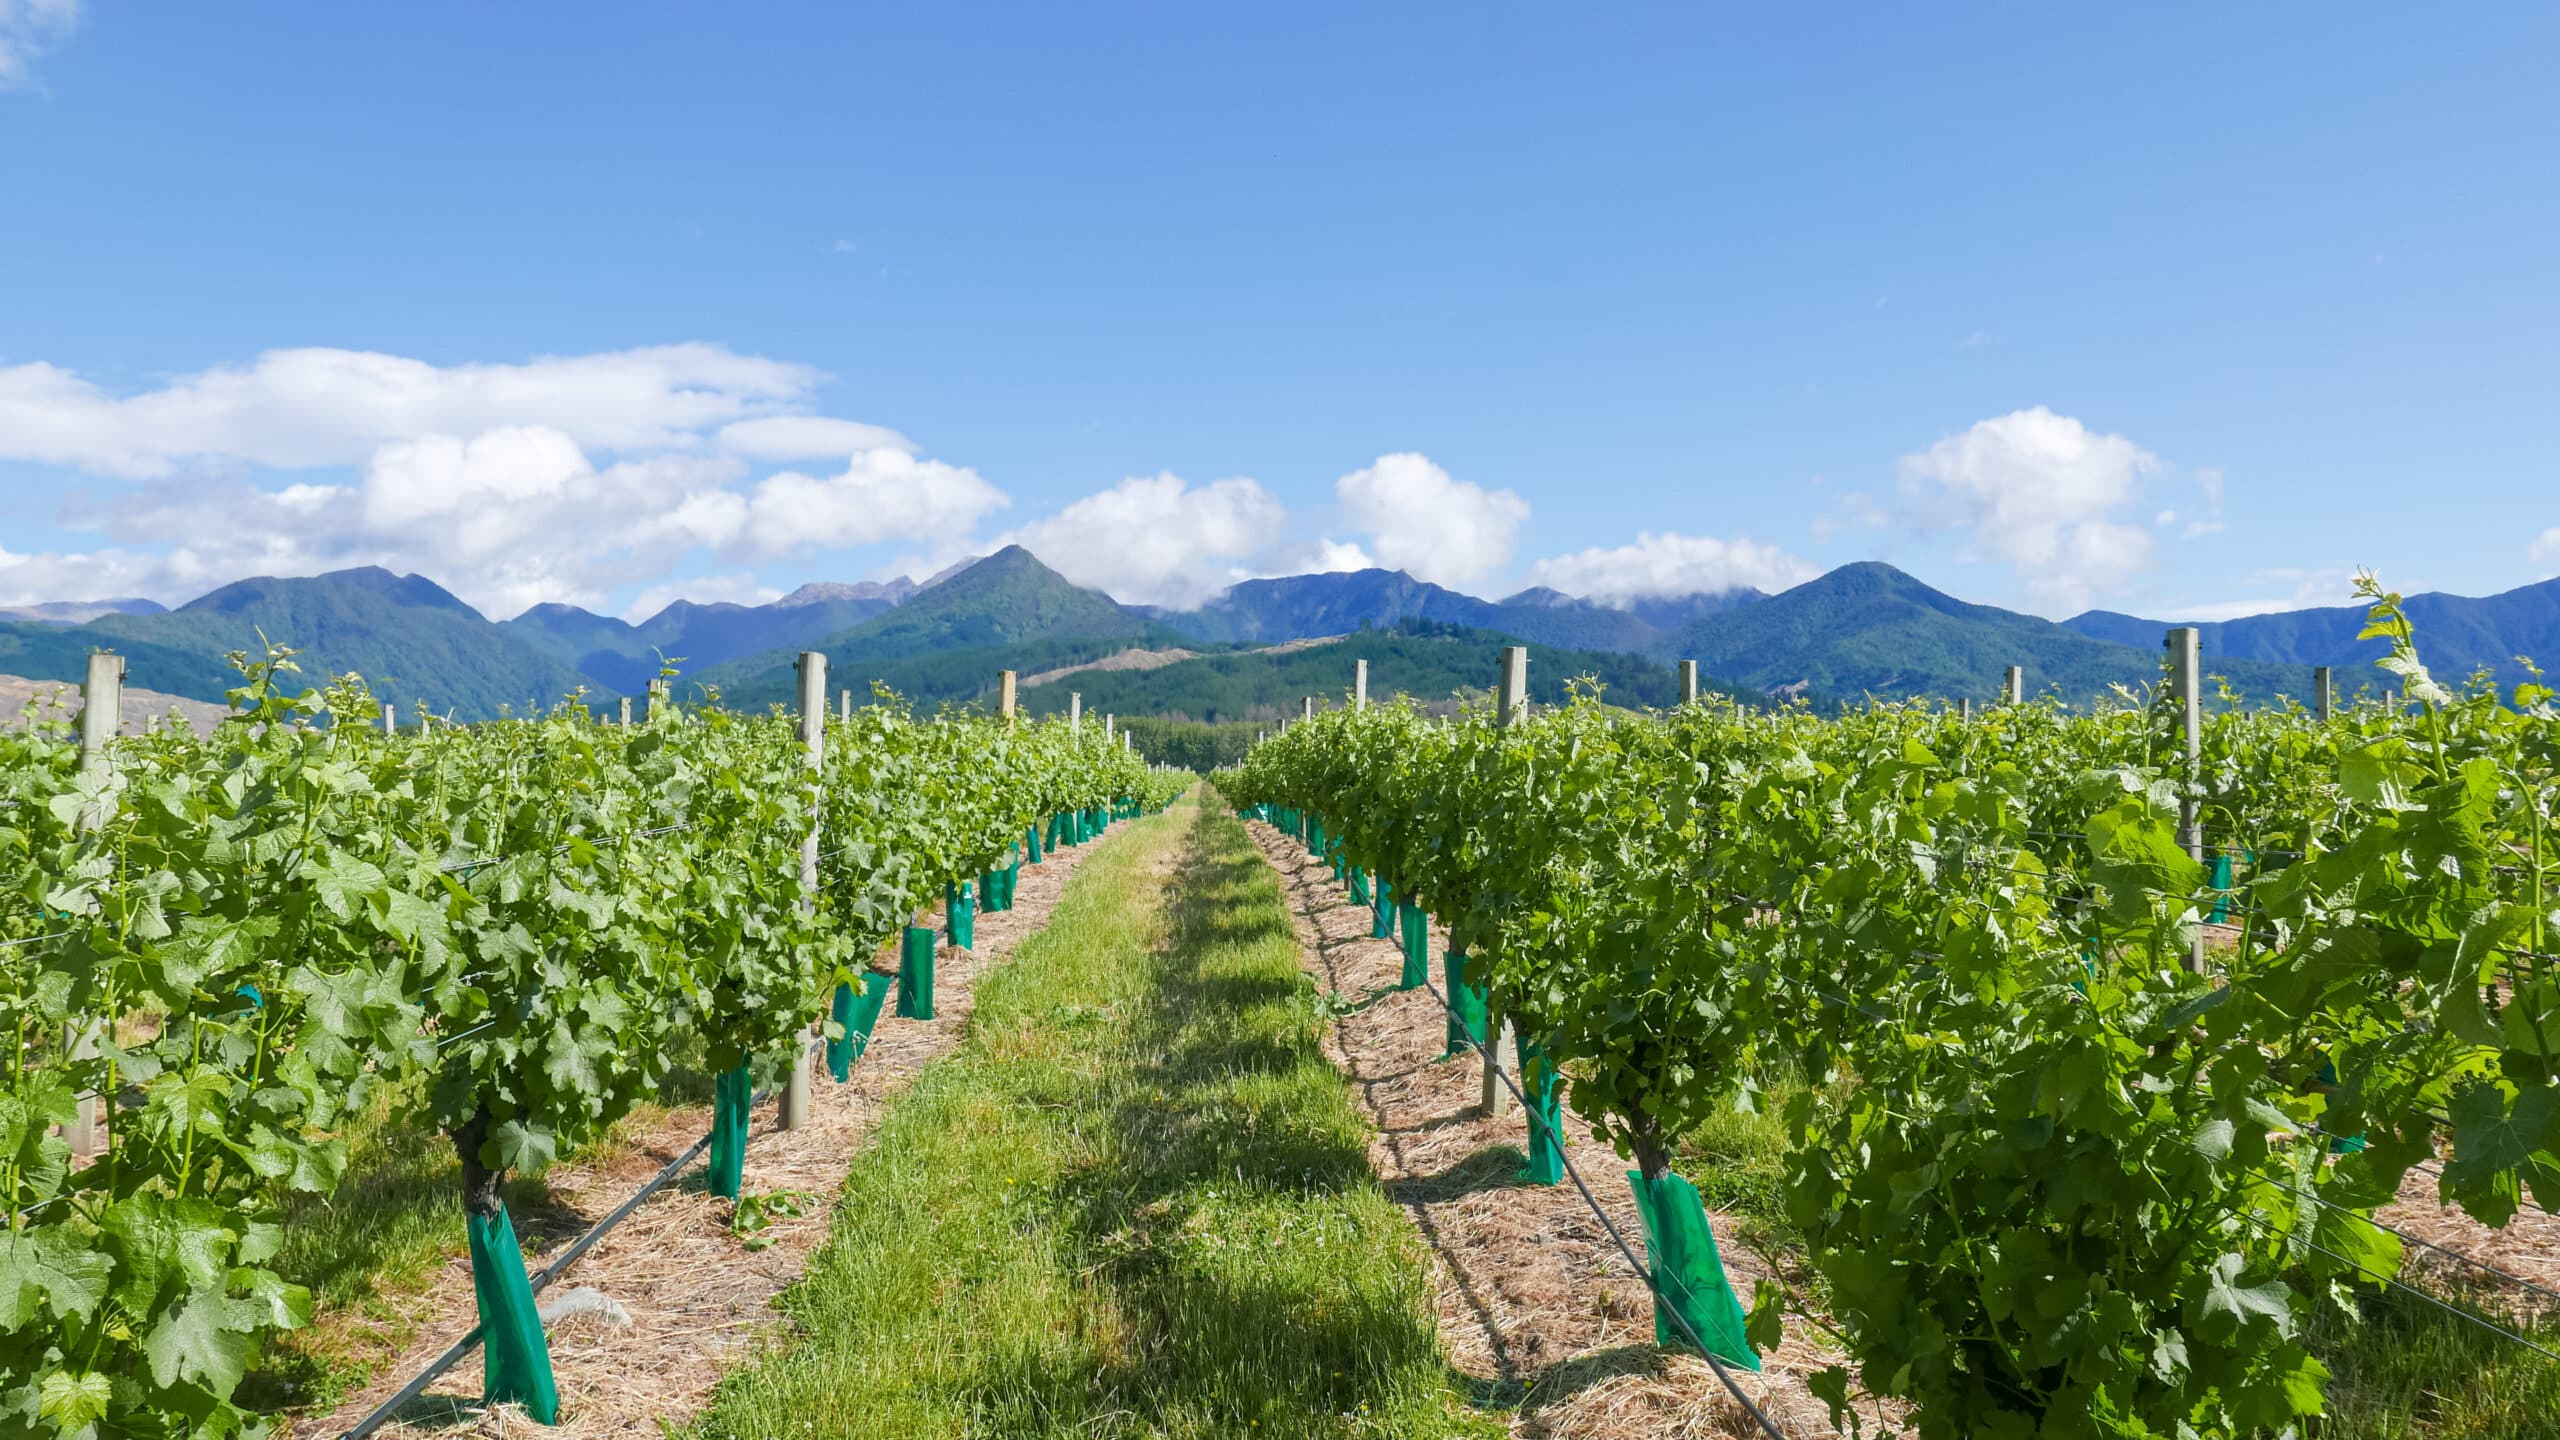 How ‘odd vines’ could help unlock resilience in the New Zealand wine industry